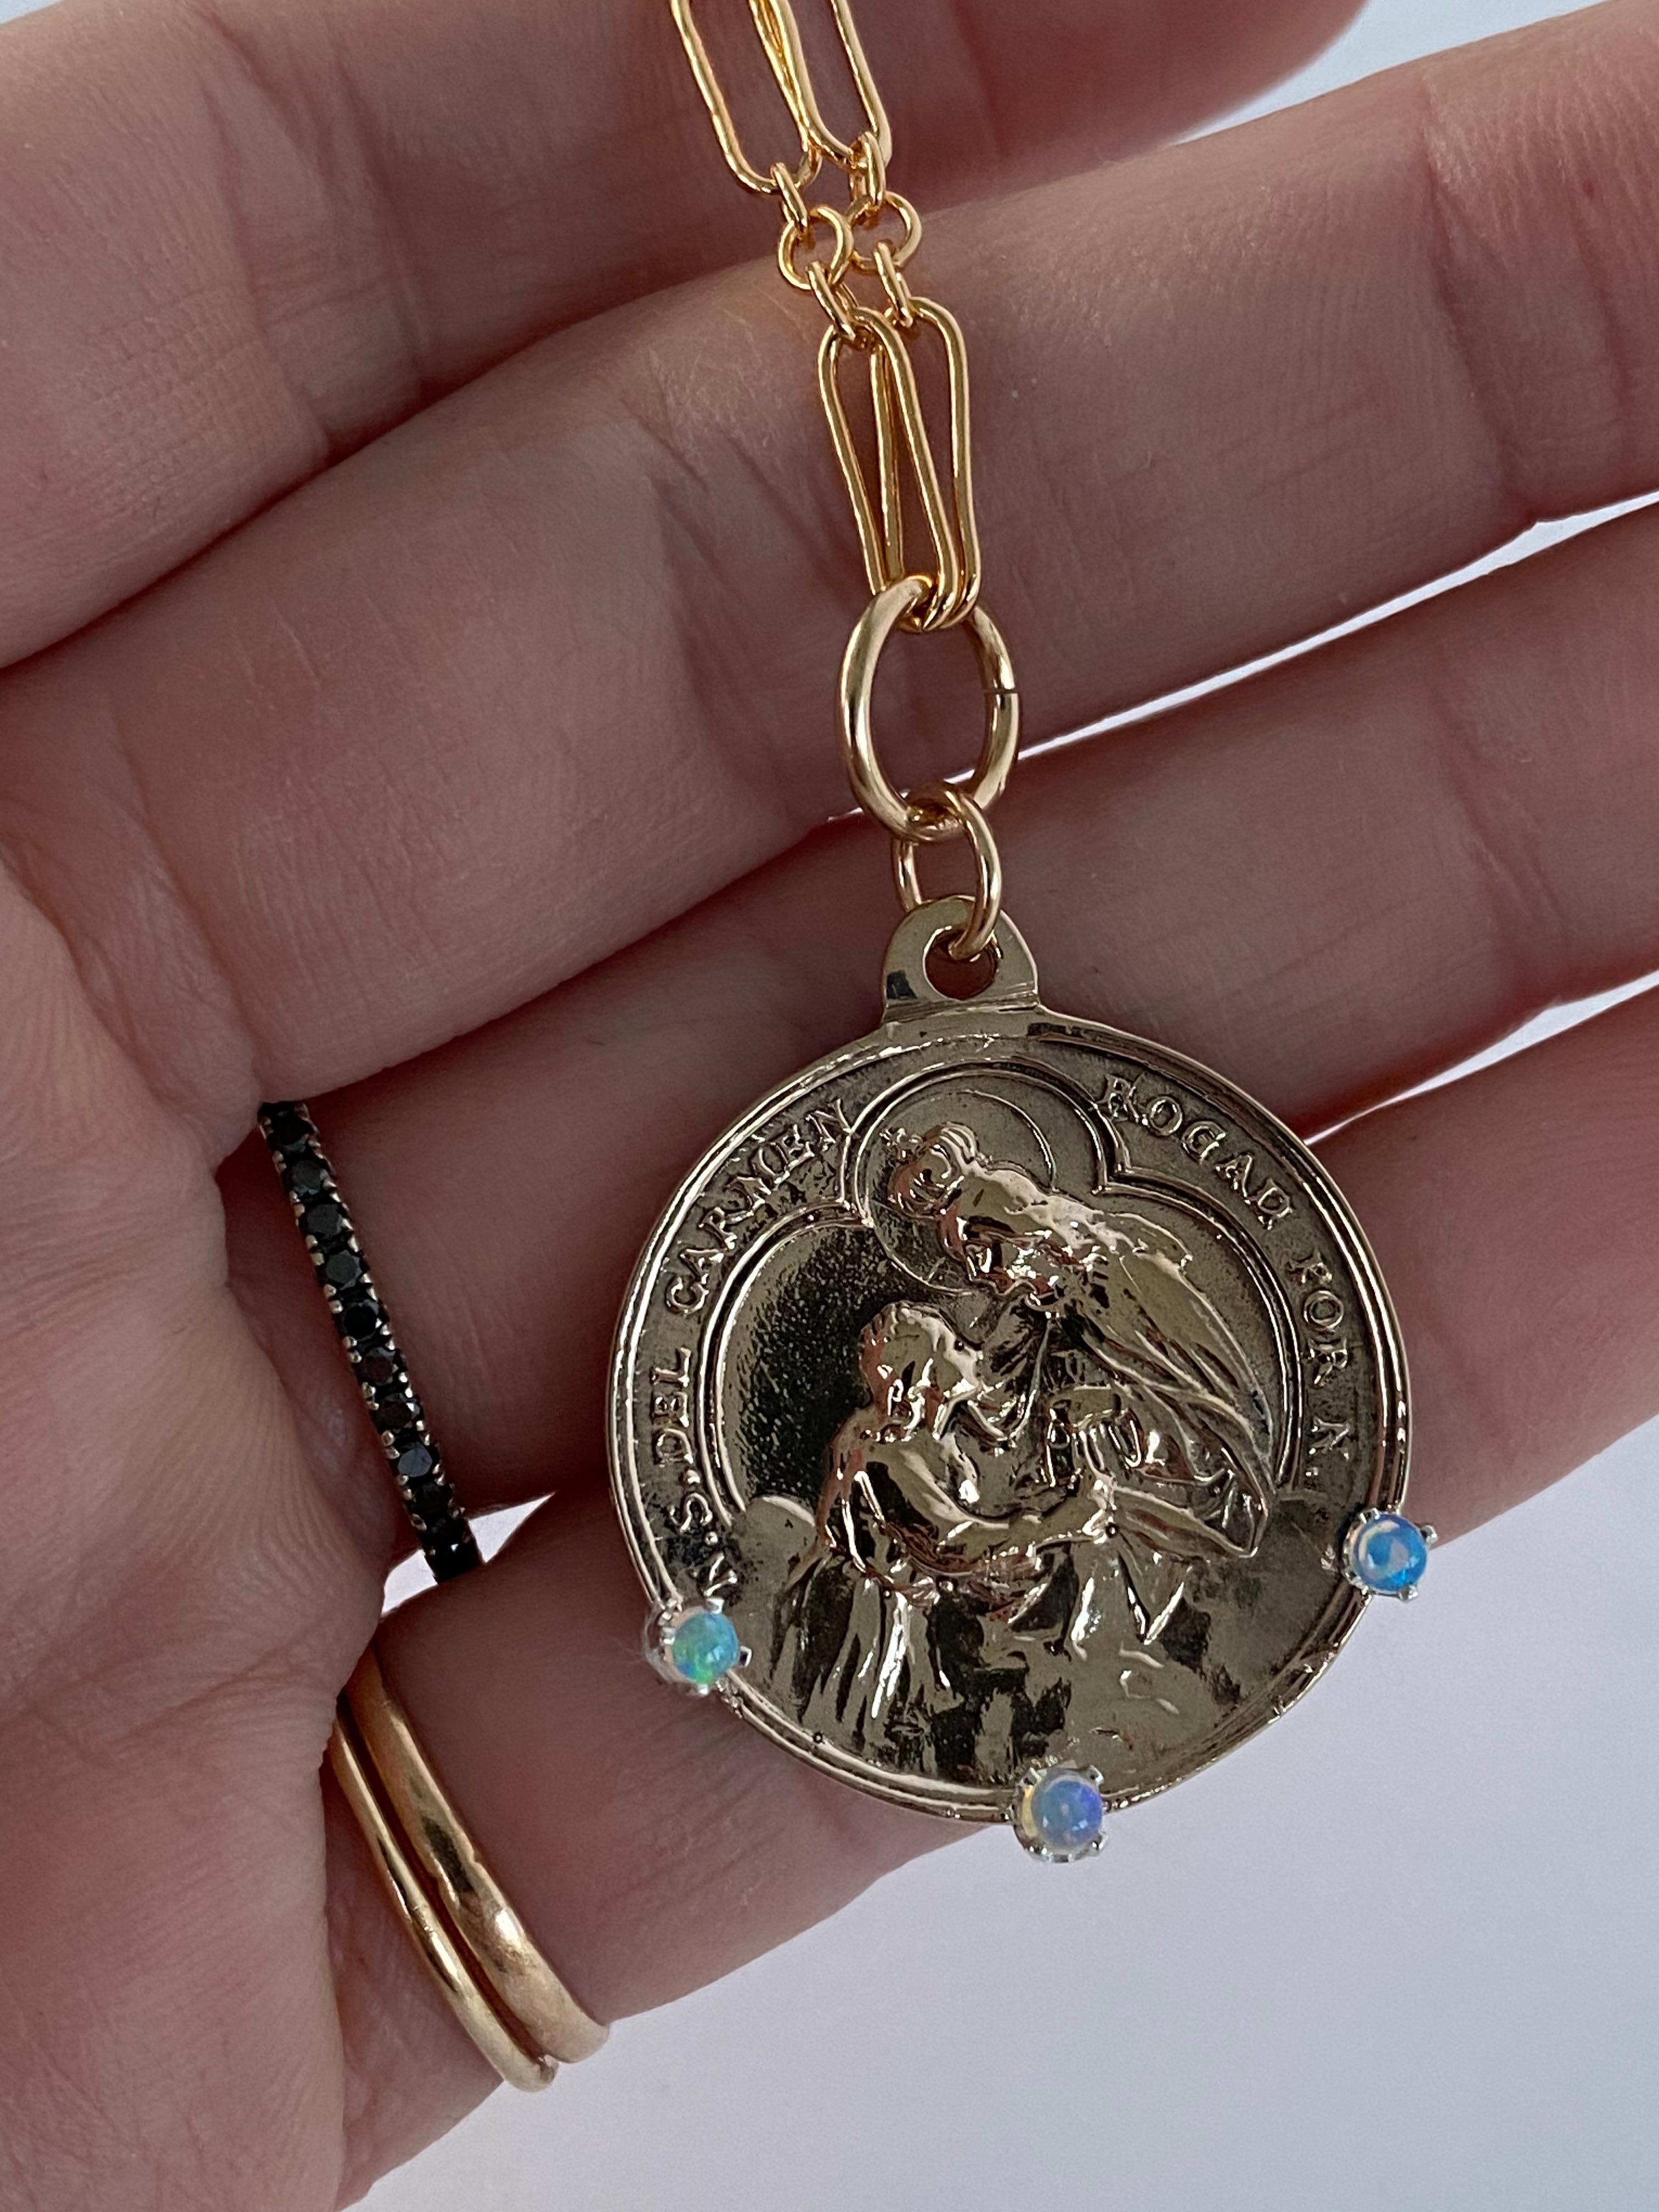 Medal Necklace Chain Virgin Mary Opals Round Coin Pendant J Dauphin For Sale 4